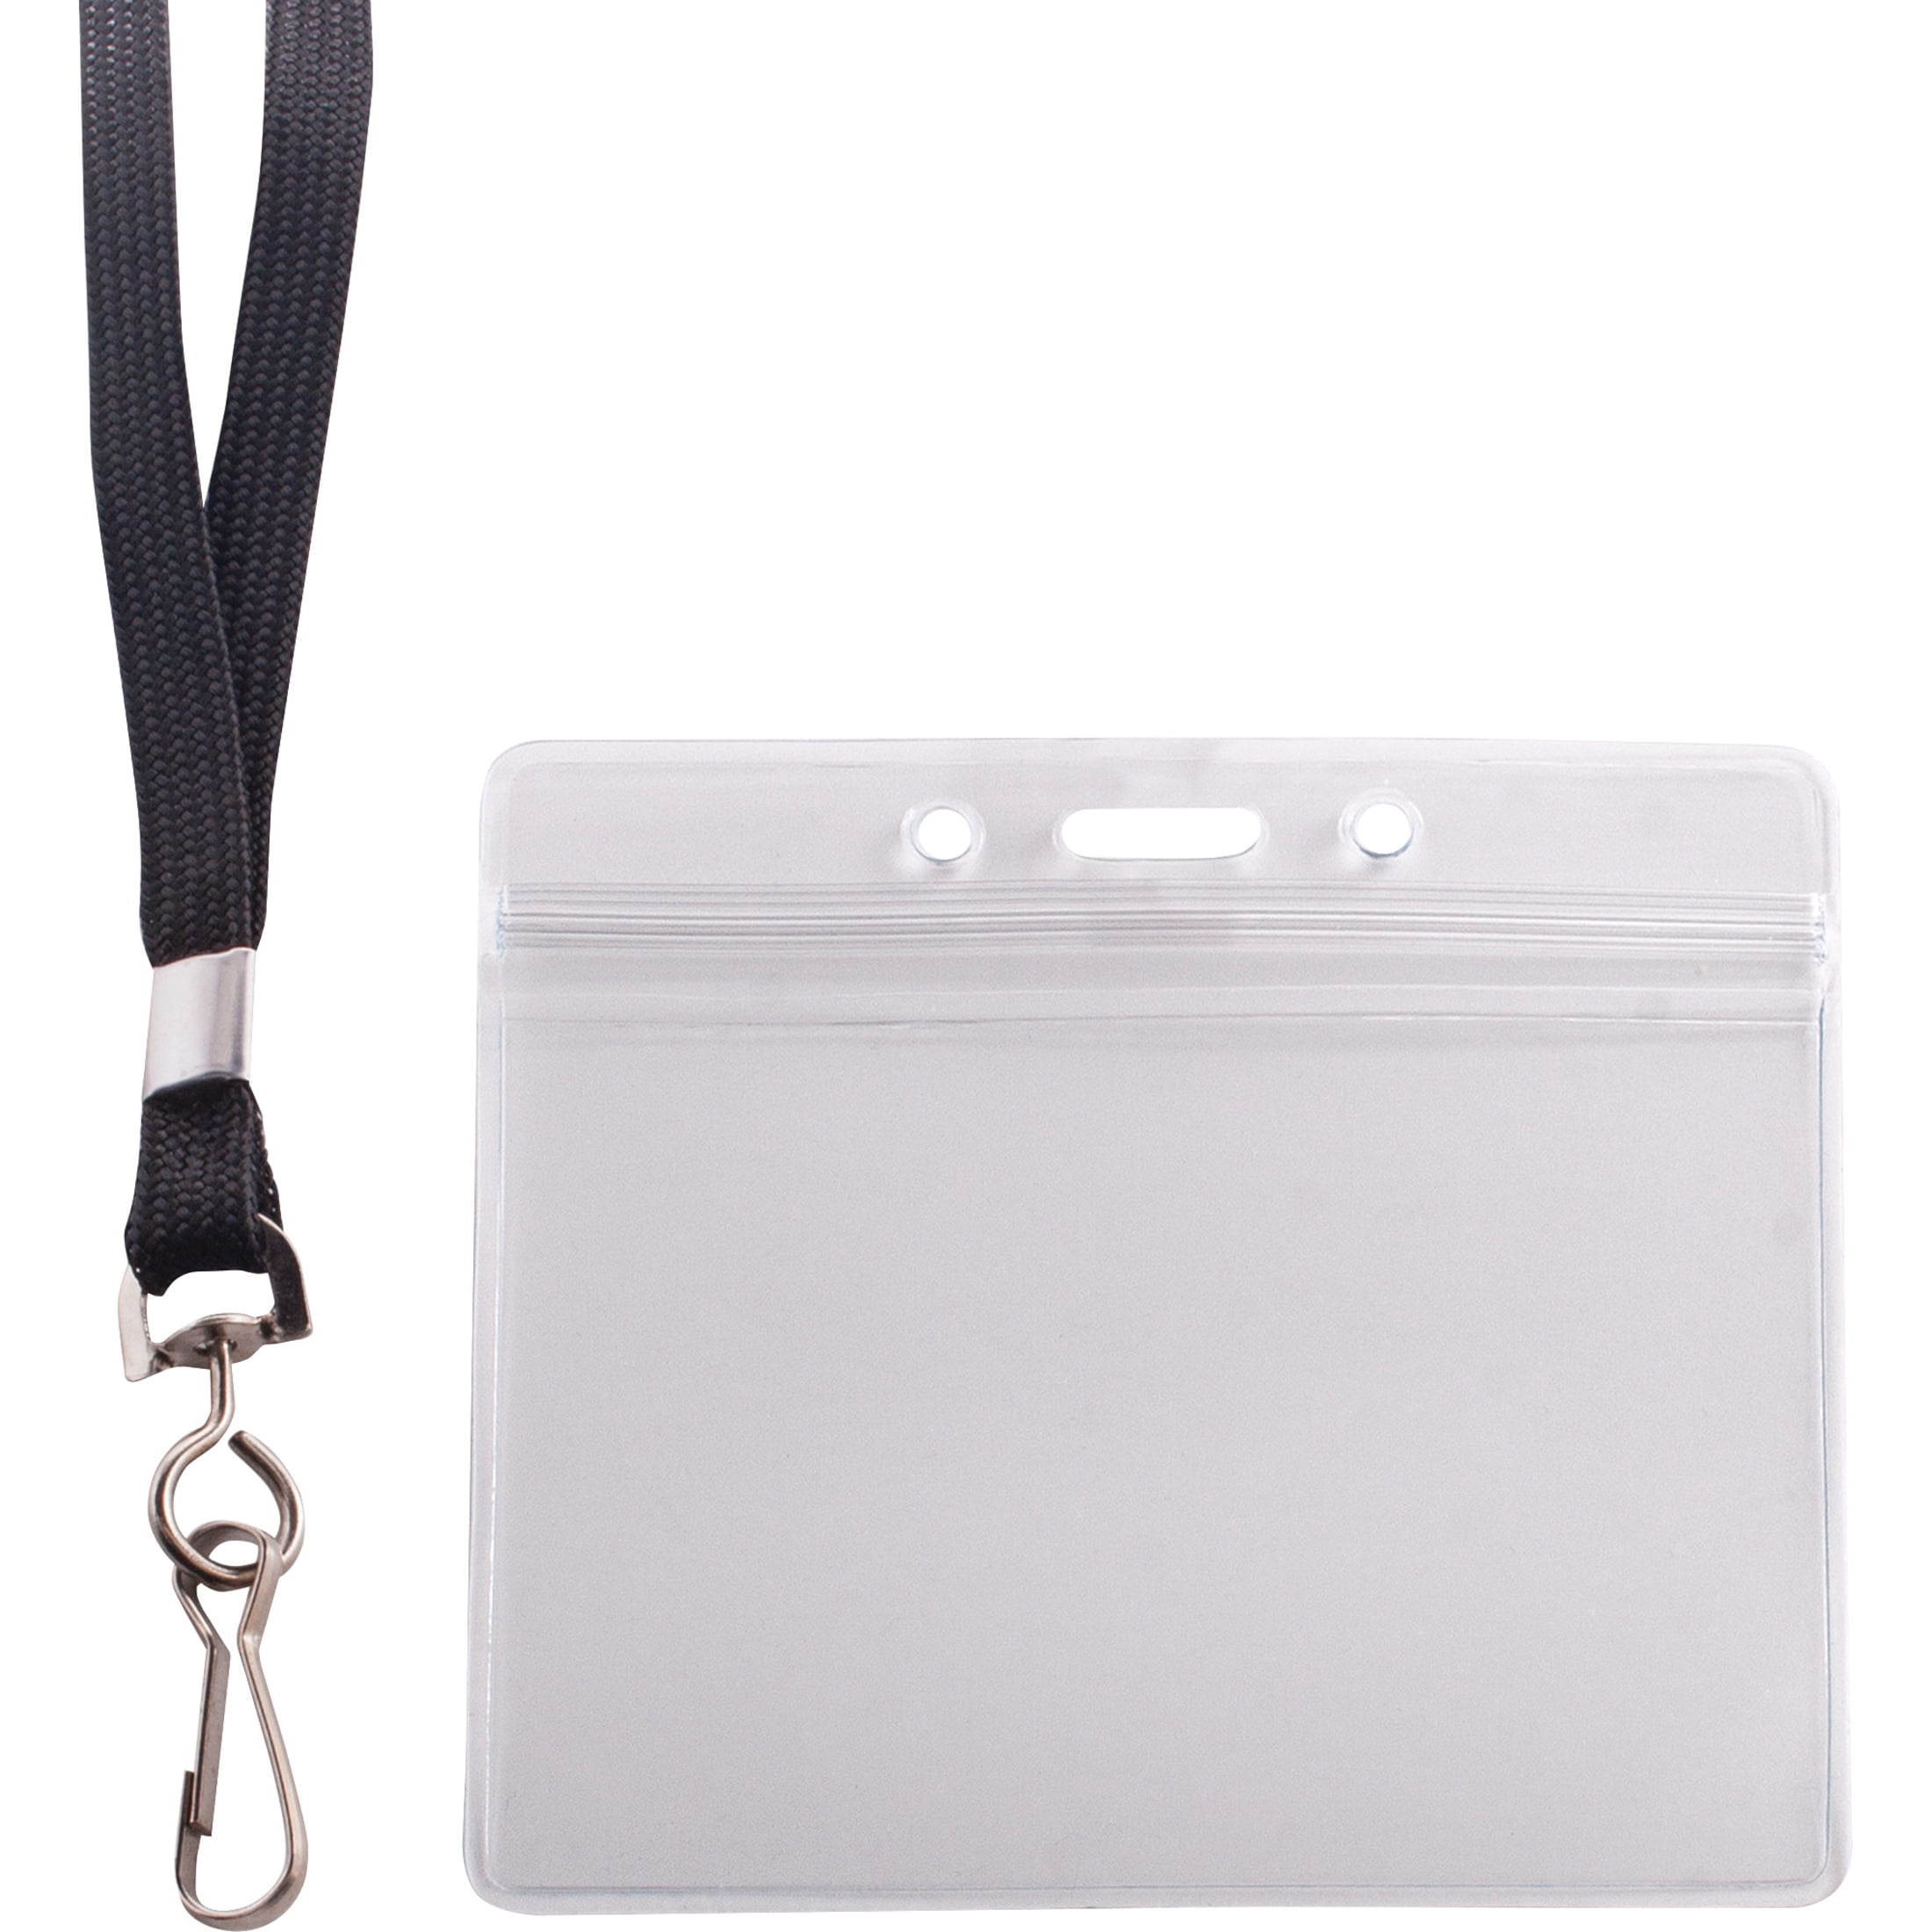 Azrra ID Badge Holder with Lanyard